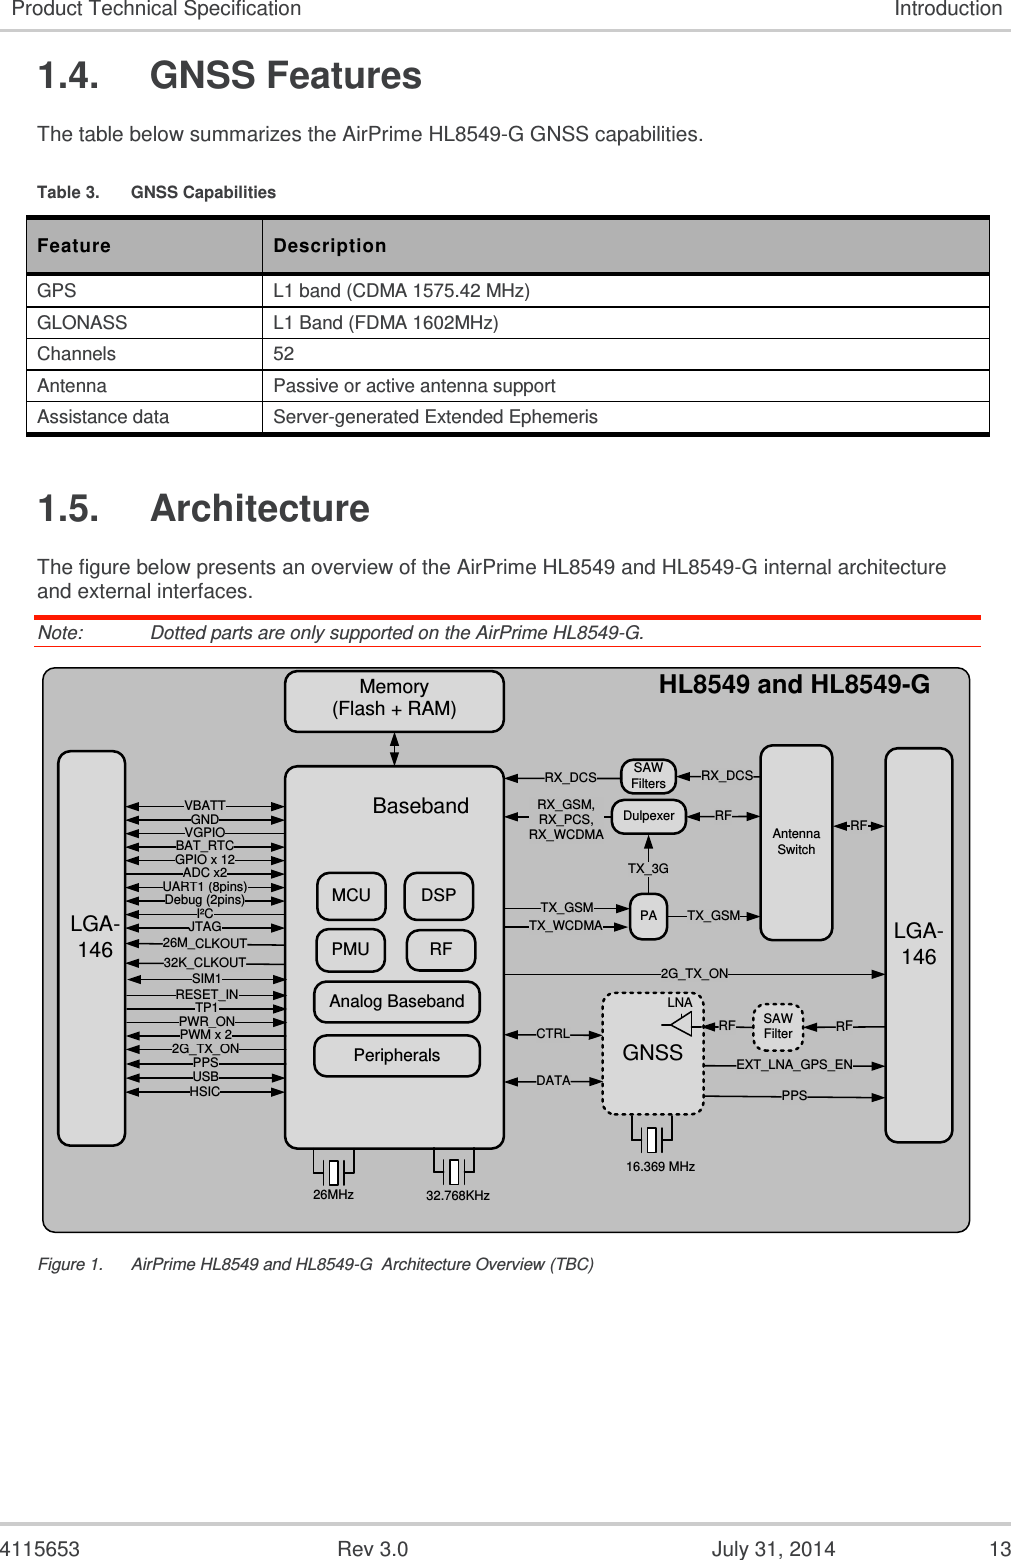  4115653  Rev 3.0  July 31, 2014  13 Product Technical Specification Introduction 1.4.  GNSS Features The table below summarizes the AirPrime HL8549-G GNSS capabilities. Table 3.  GNSS Capabilities Feature Description GPS L1 band (CDMA 1575.42 MHz) GLONASS  L1 Band (FDMA 1602MHz) Channels 52 Antenna Passive or active antenna support Assistance data Server-generated Extended Ephemeris 1.5.  Architecture The figure below presents an overview of the AirPrime HL8549 and HL8549-G internal architecture and external interfaces. Note:   Dotted parts are only supported on the AirPrime HL8549-G. HL8549 and HL8549-GMemory(Flash + RAM)GNSSSAWFiltersAntennaSwitchCTRLDATA16.369 MHz26MHz 32.768KHzUART1 (8pins)Debug (2pins)VBATTGNDVGPIOBAT_RTCGPIO x 12ADC x2I²CRESET_INRFRFJTAGLGA-146 BasebandEXT_LNA_GPS_ENPPSSAWFilterRFLNASIM1MCU DSPPMU RFAnalog BasebandPeripheralsRX_GSM, RX_PCS, RX_WCDMARX_DCSRFTX_GSMTX_3GRX_DCSTX_WCDMA LGA-146 2G_TX_ON26M_CLKOUT32K_CLKOUTTP1PWR_ON2G_TX_ONPWM x 2PPSDulpexerPATX_GSMUSBHSIC Figure 1.  AirPrime HL8549 and HL8549-G  Architecture Overview (TBC)    